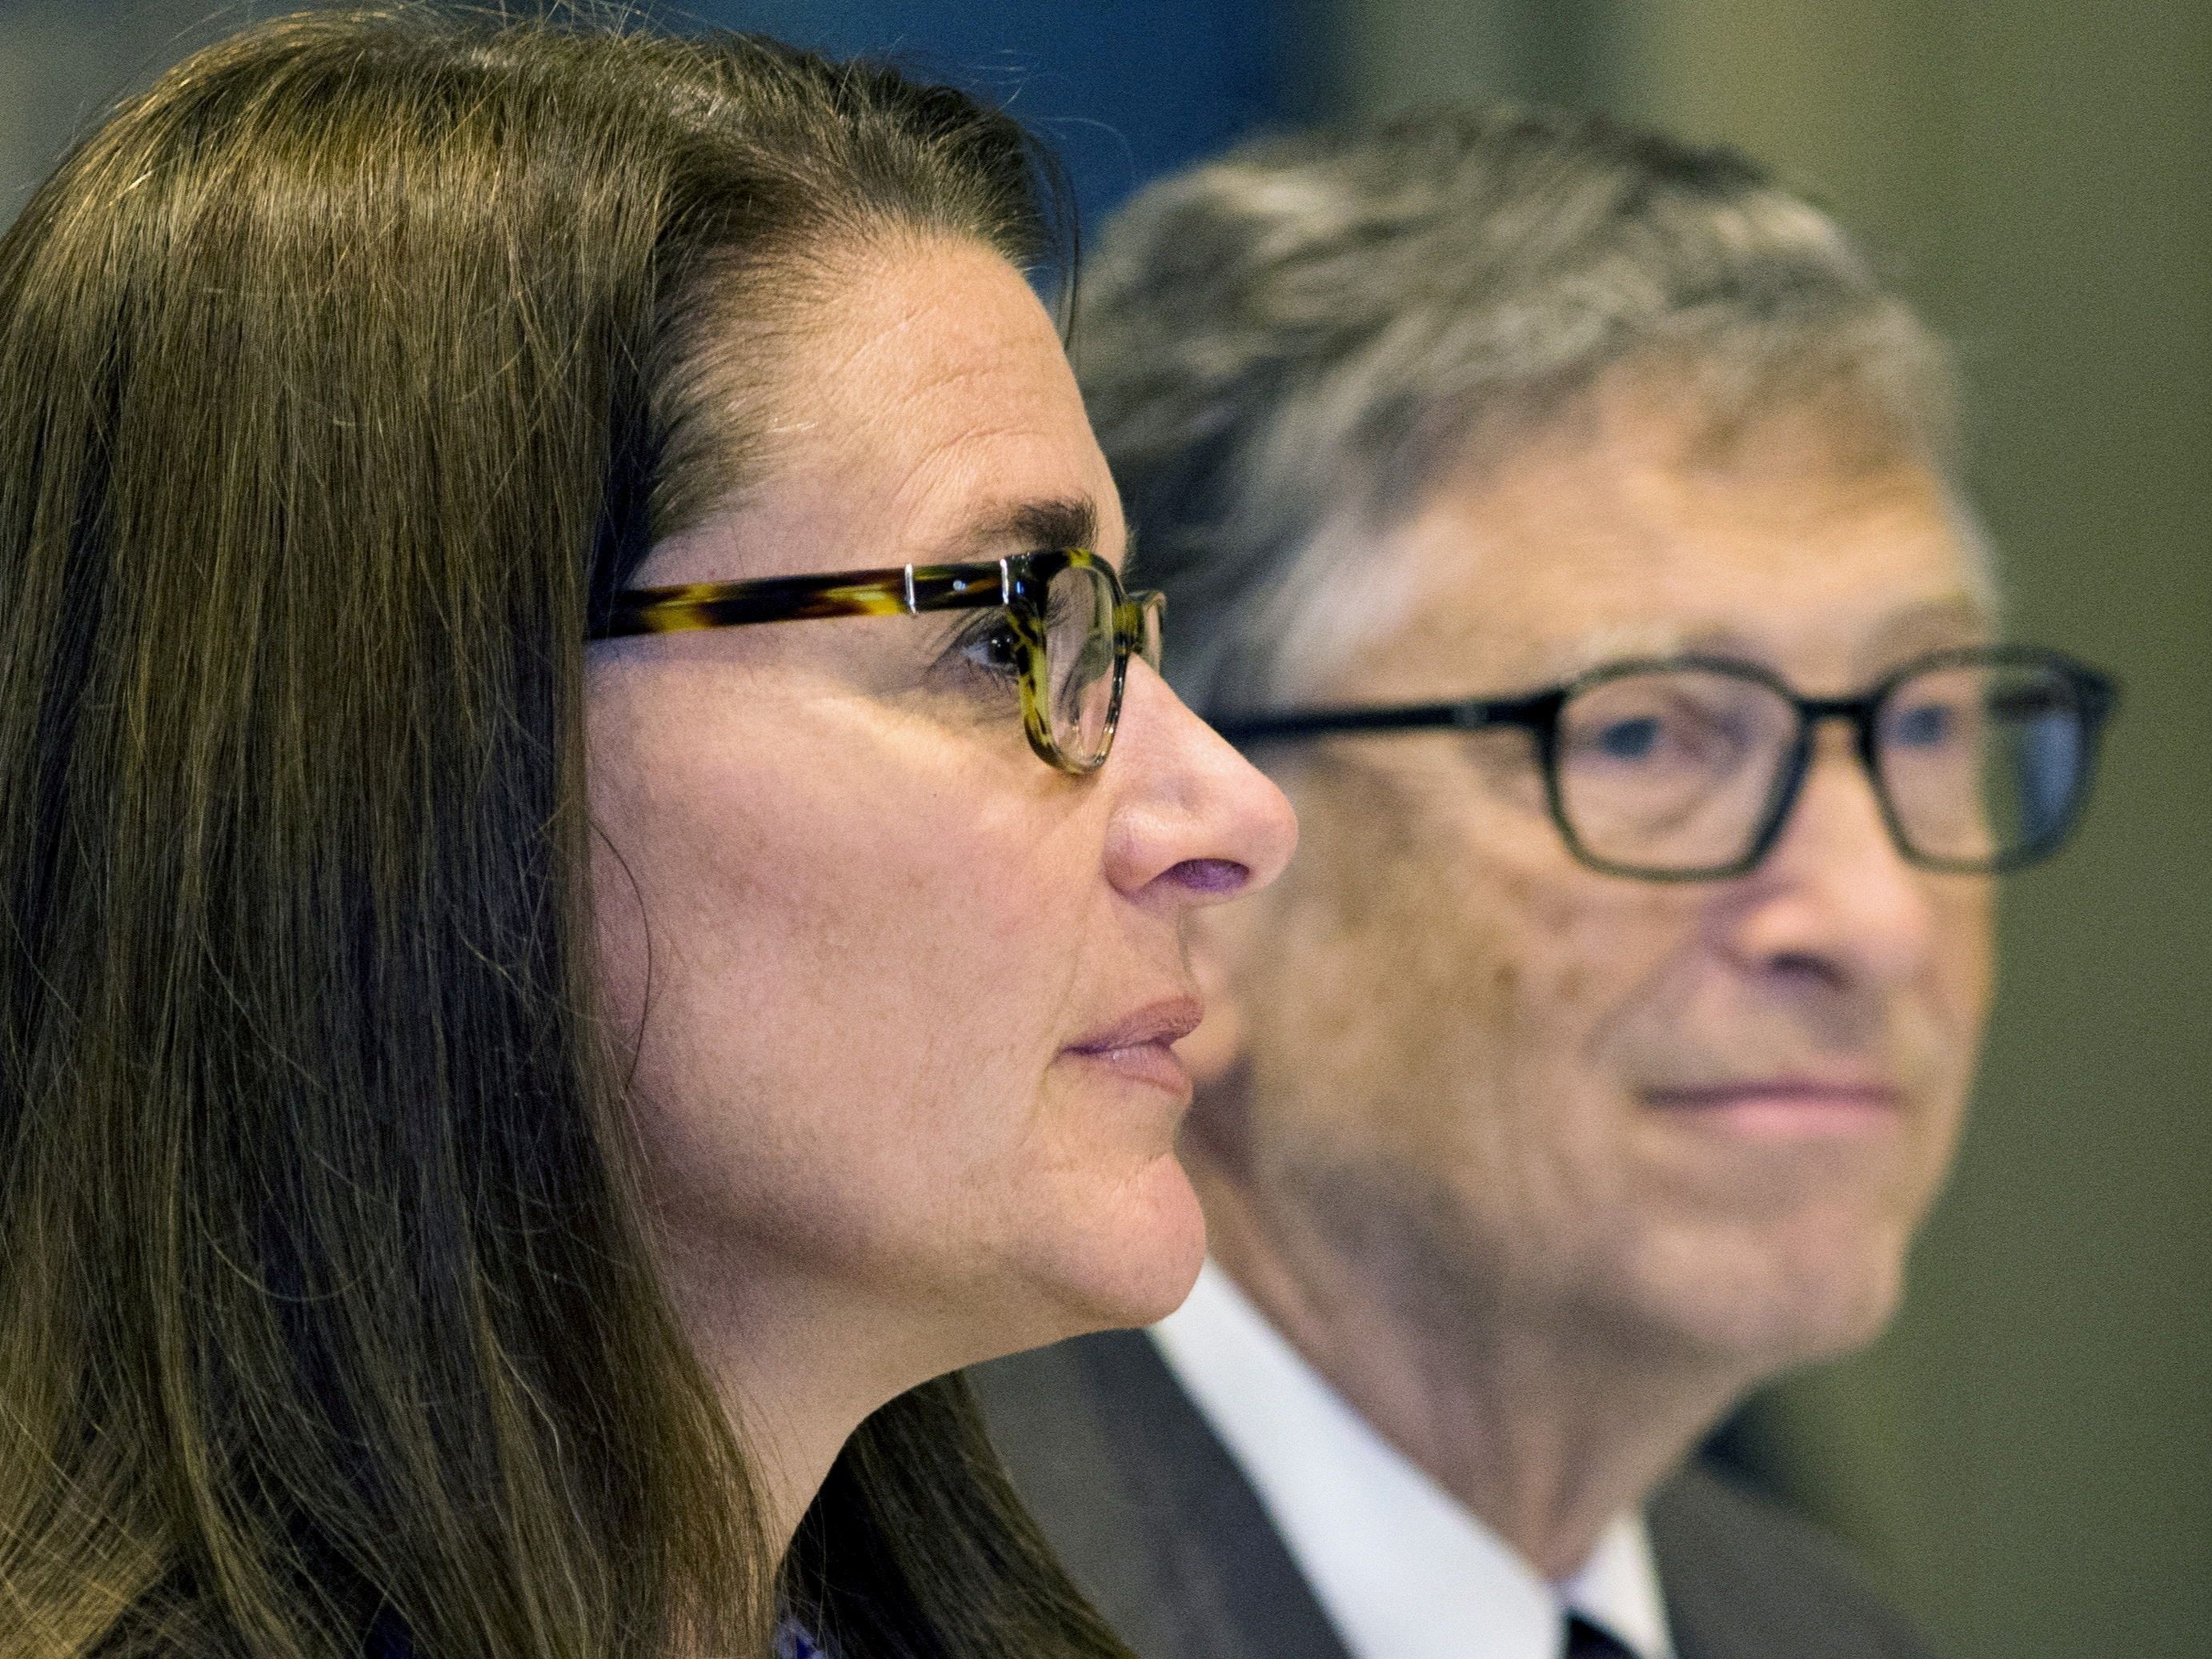 American business magnate Bill Gates and wife Melinda Gates attend a news conference by United Nations’s movement “Every Woman, Every Child” in Manhattan, New York 24 September 2015